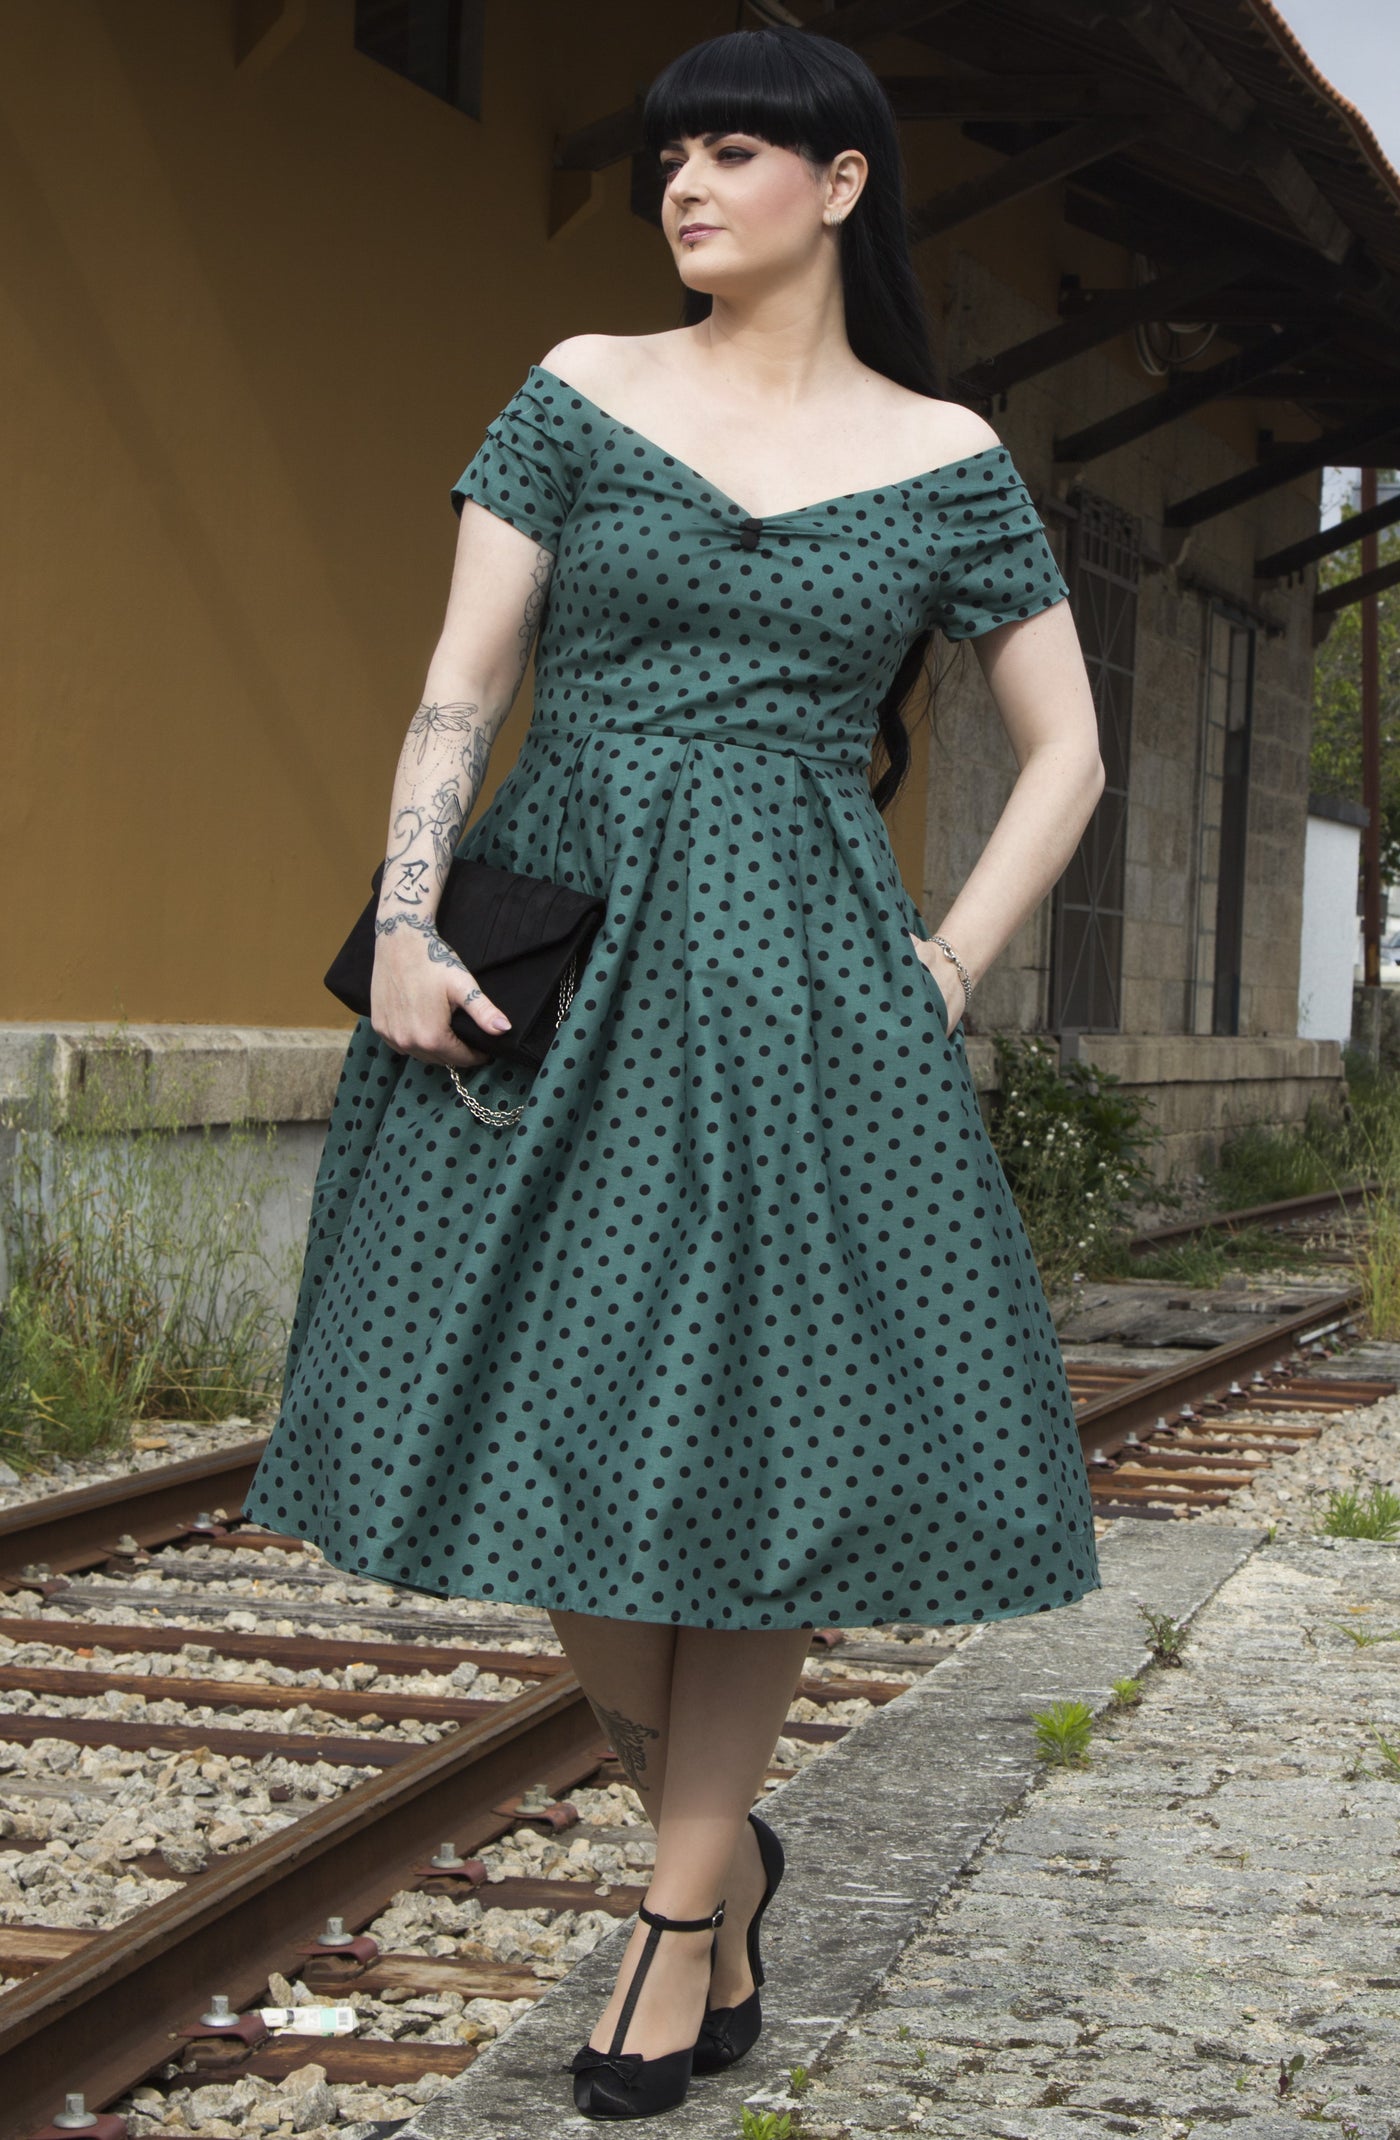 Customer wears our off shoulder flared dress, in dark green, with black polka dots, by train tracks